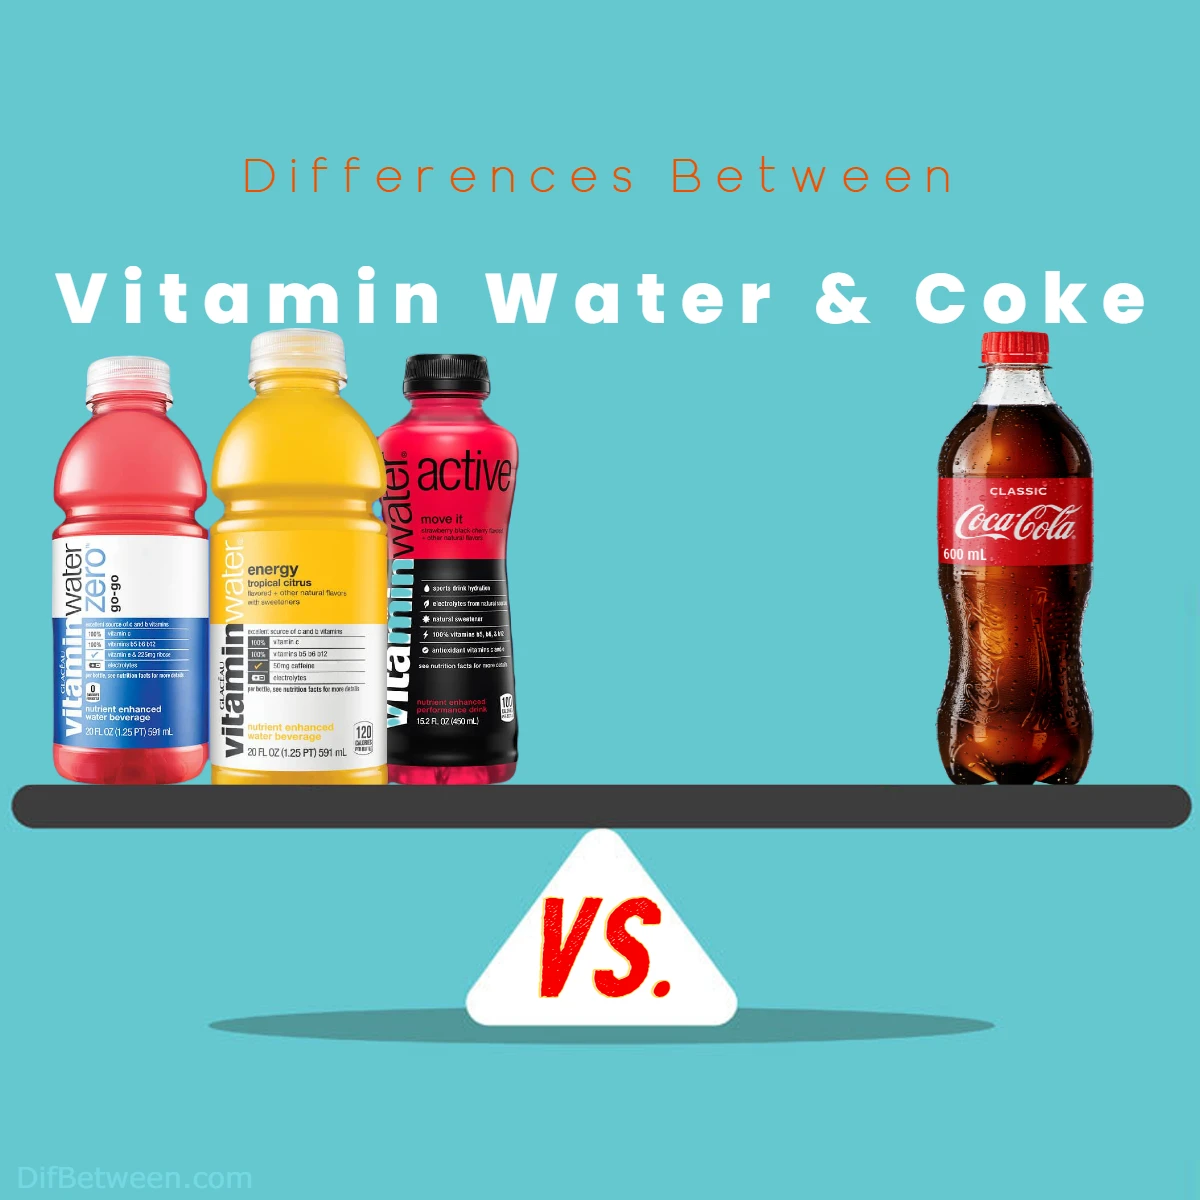 Differences Between Coke and Vitamin Water